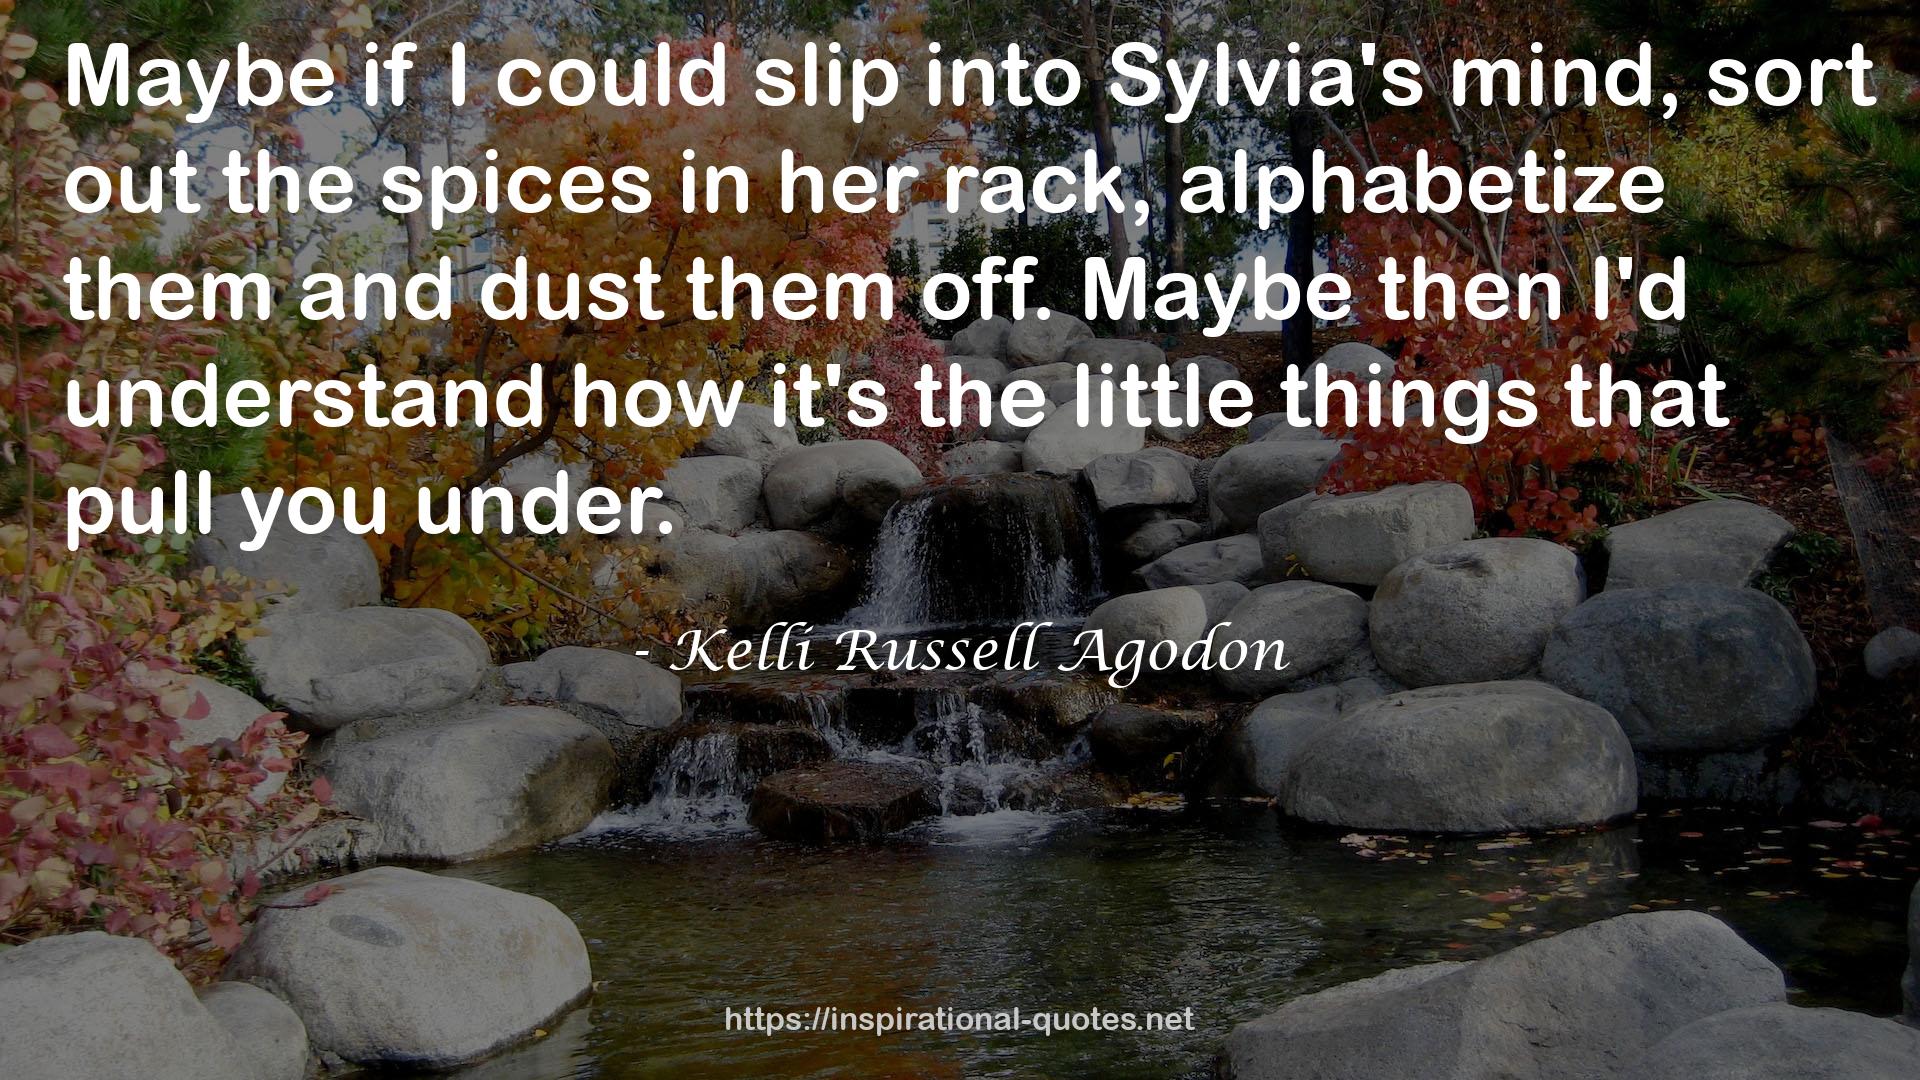 Kelli Russell Agodon QUOTES